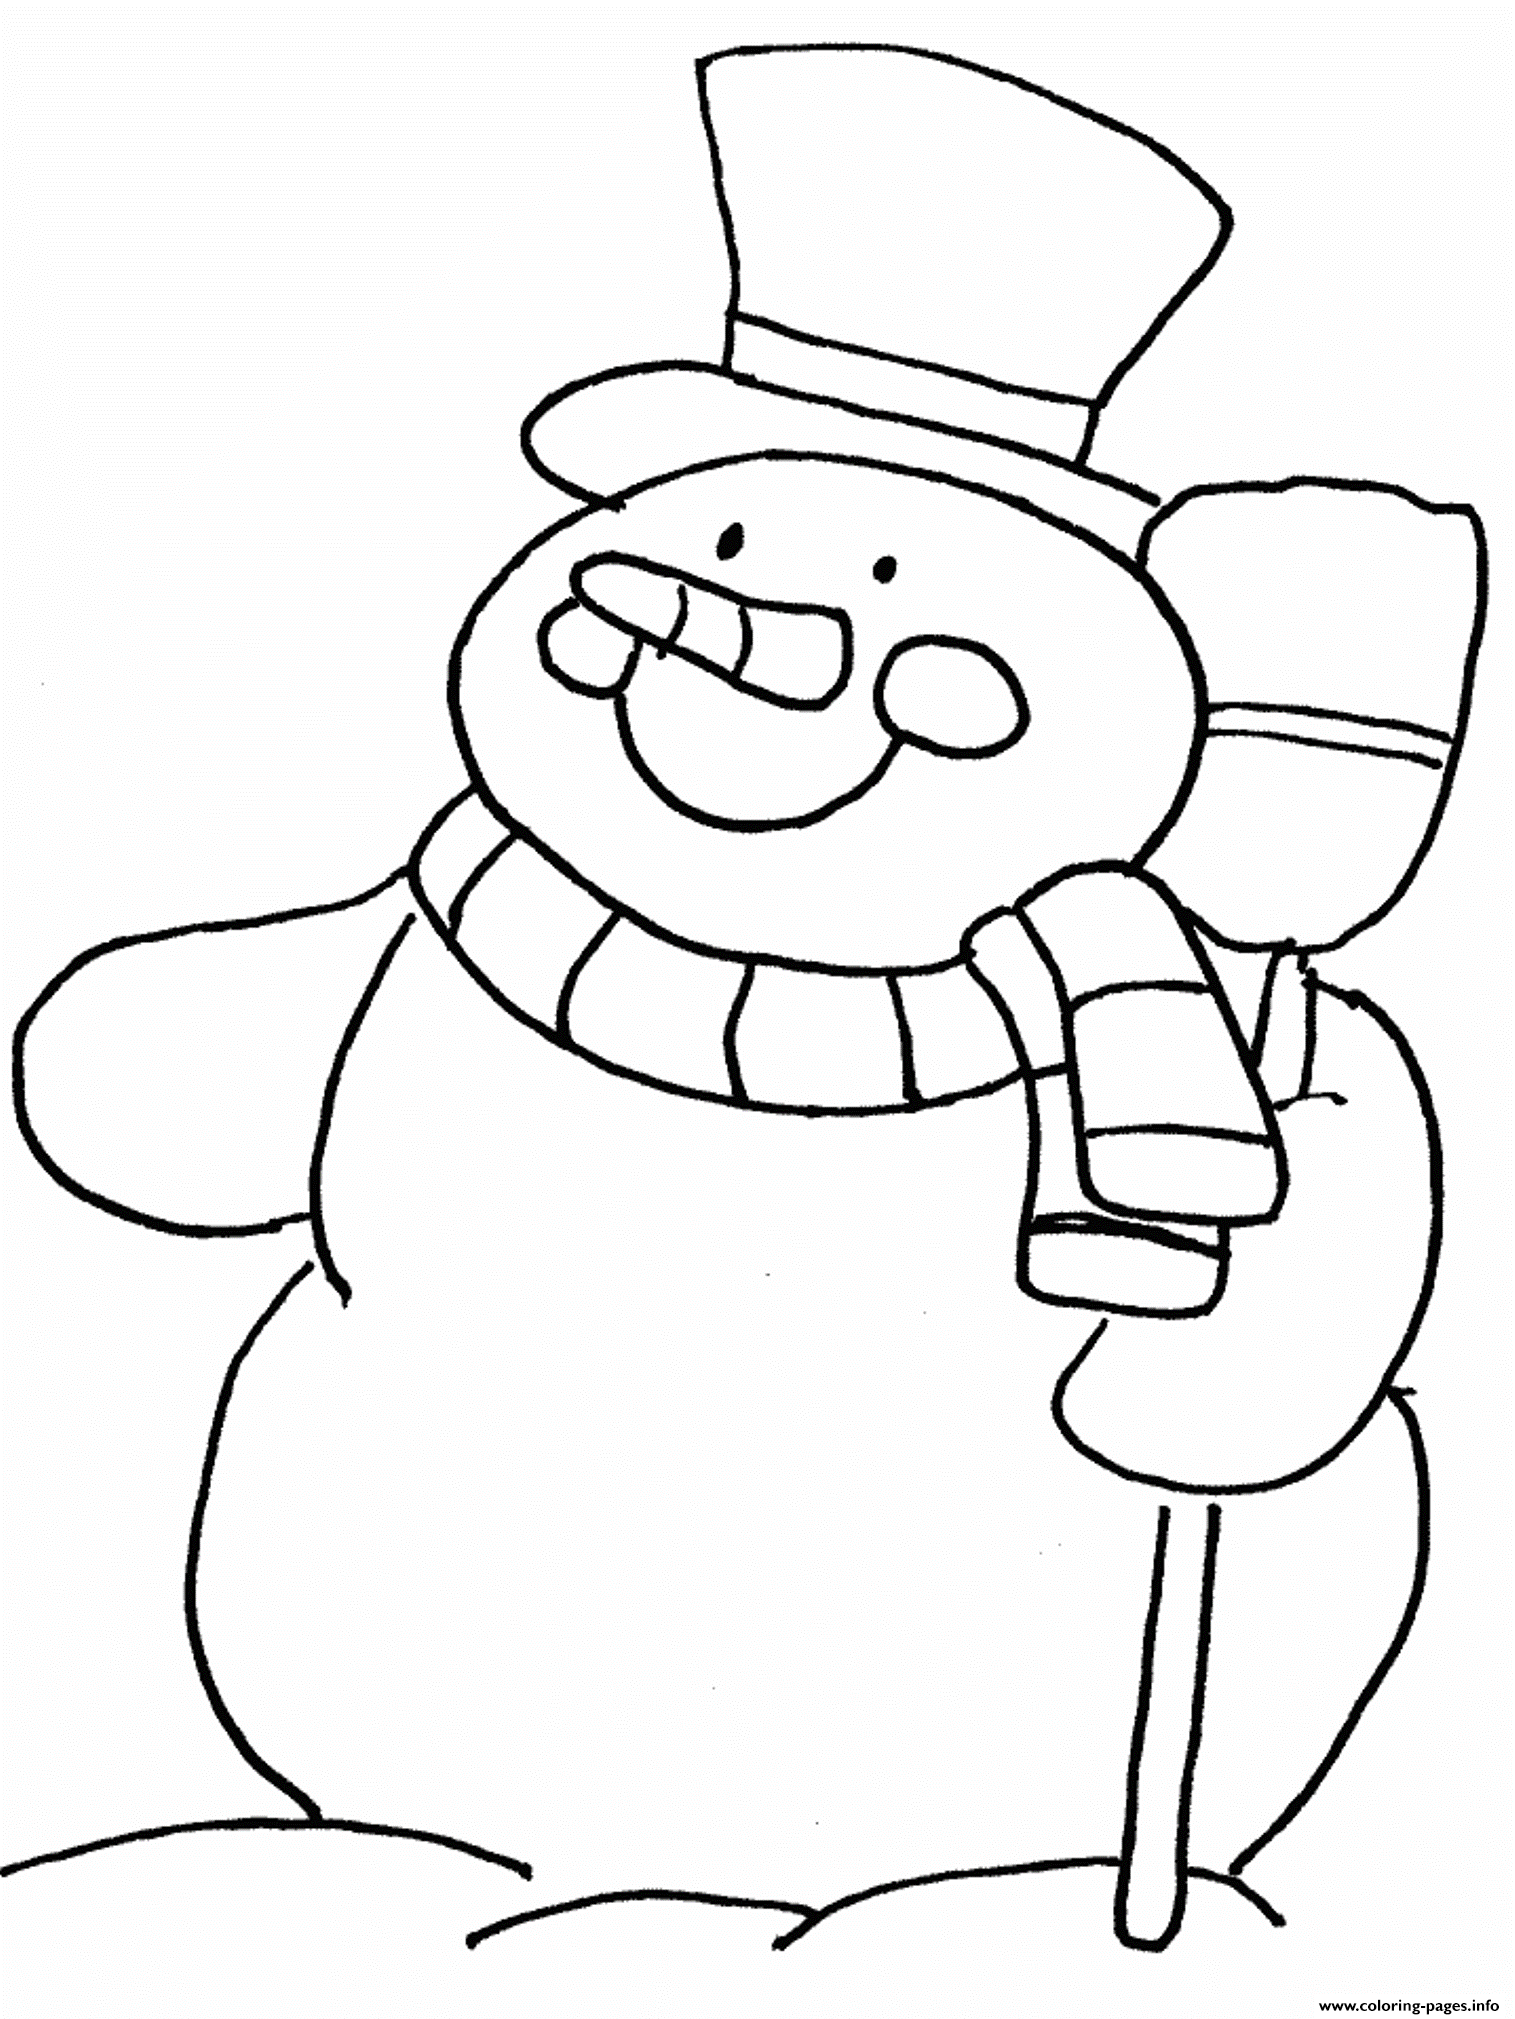 Winter Smiling Snowman 1812 Coloring page Printable